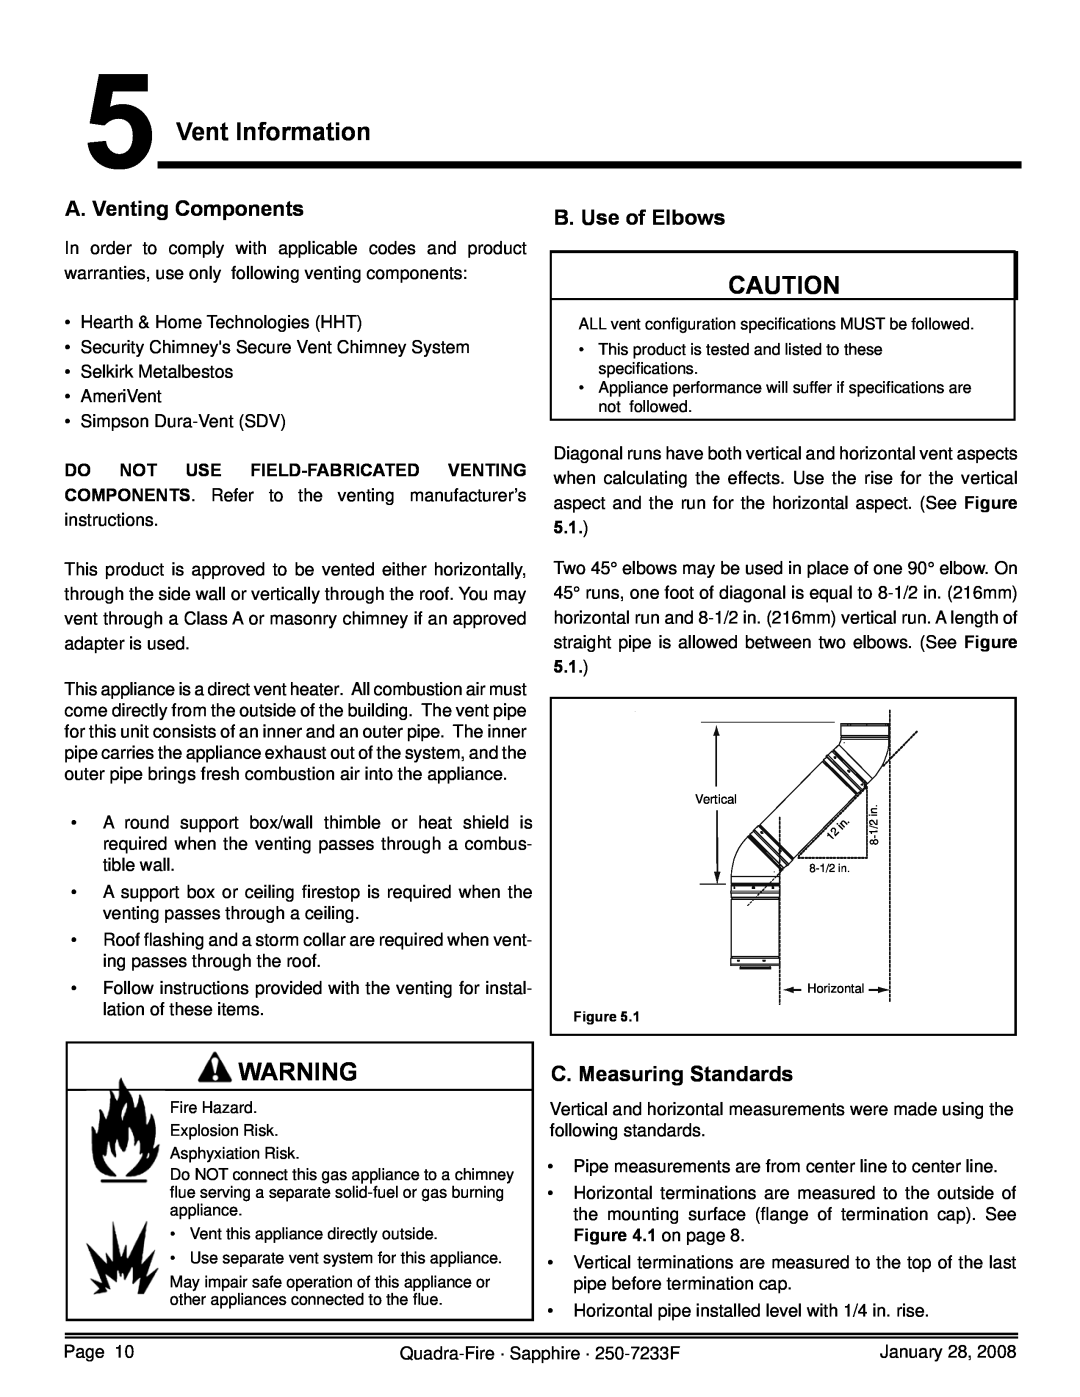 Quadra-Fire 839-1460, SAPPH-D-CWL Vent Information, A. Venting Components, B. Use of Elbows, C. Measuring Standards 